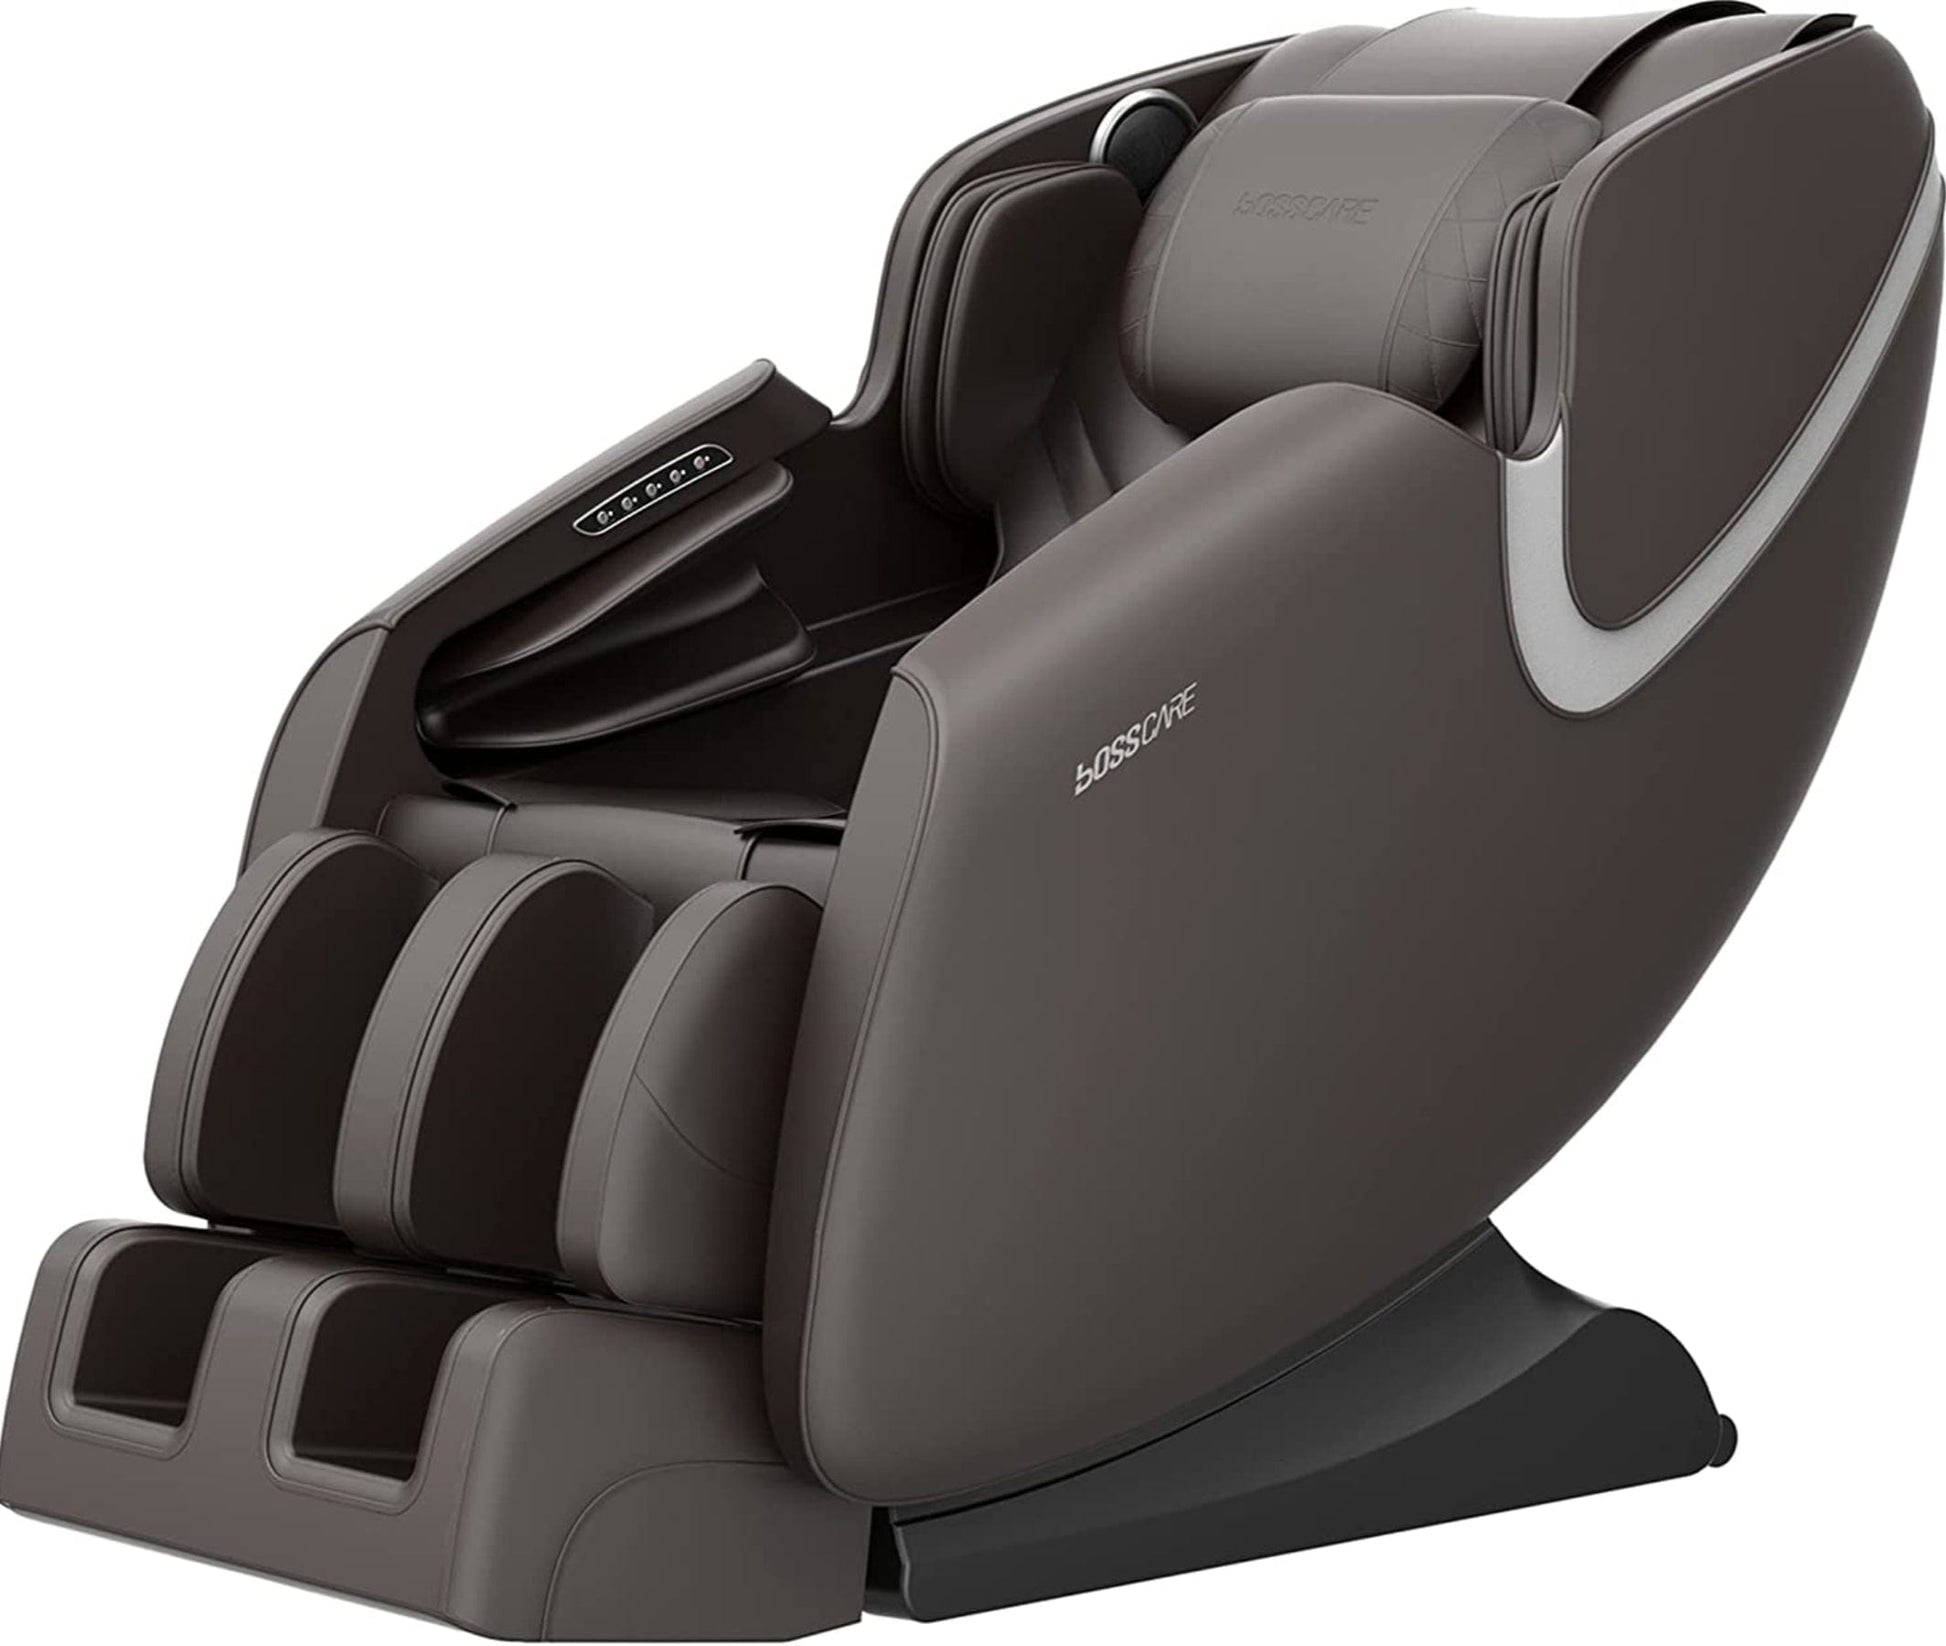 1st Choice Furniture Direct massage chair 1st Choice Full Body Massage Chair Recliner w/Bluetooth in Brown Finish